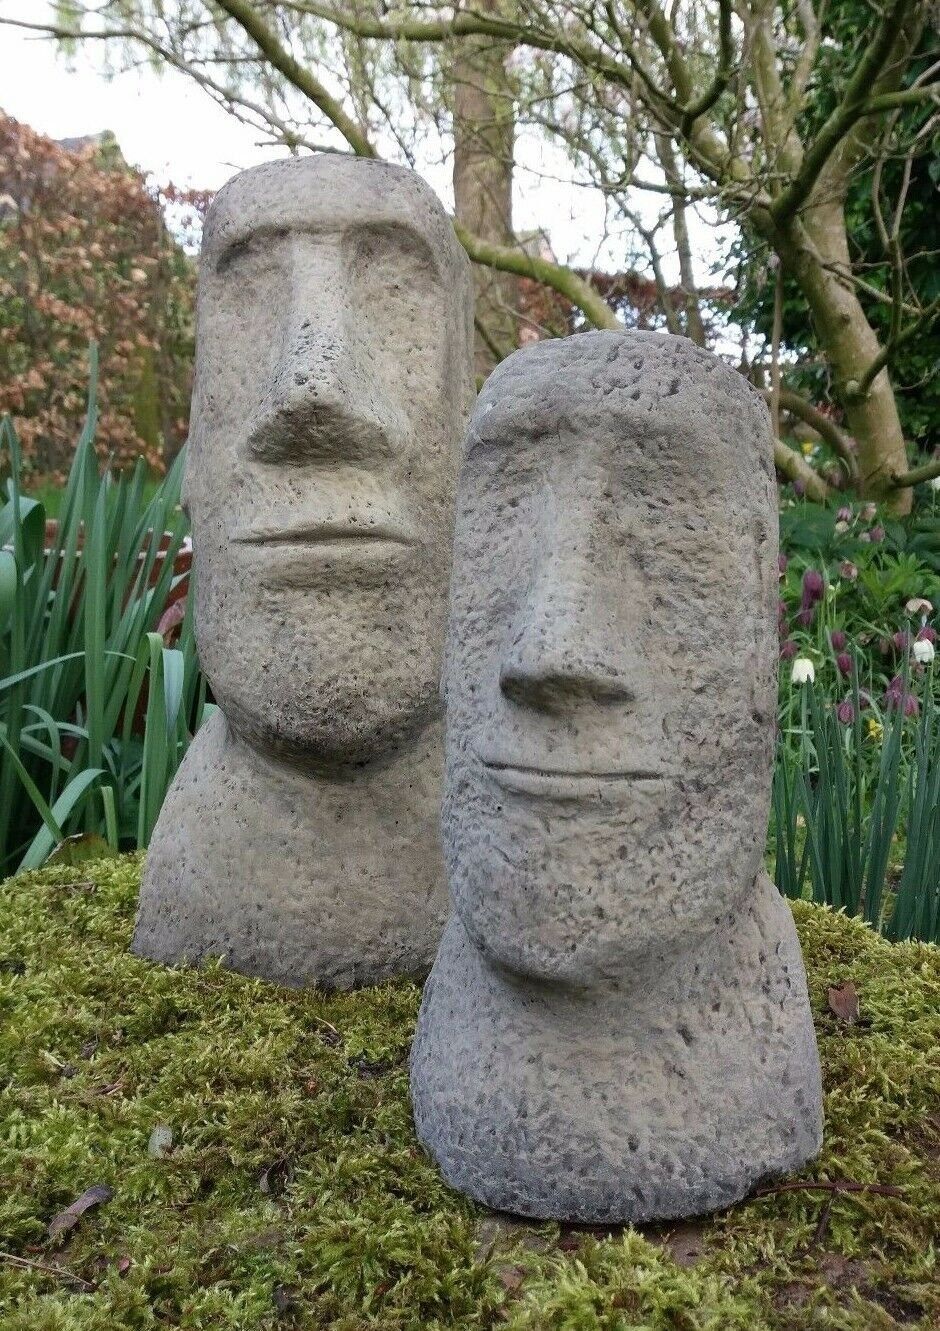 The Beauty of Stone Garden Ornaments